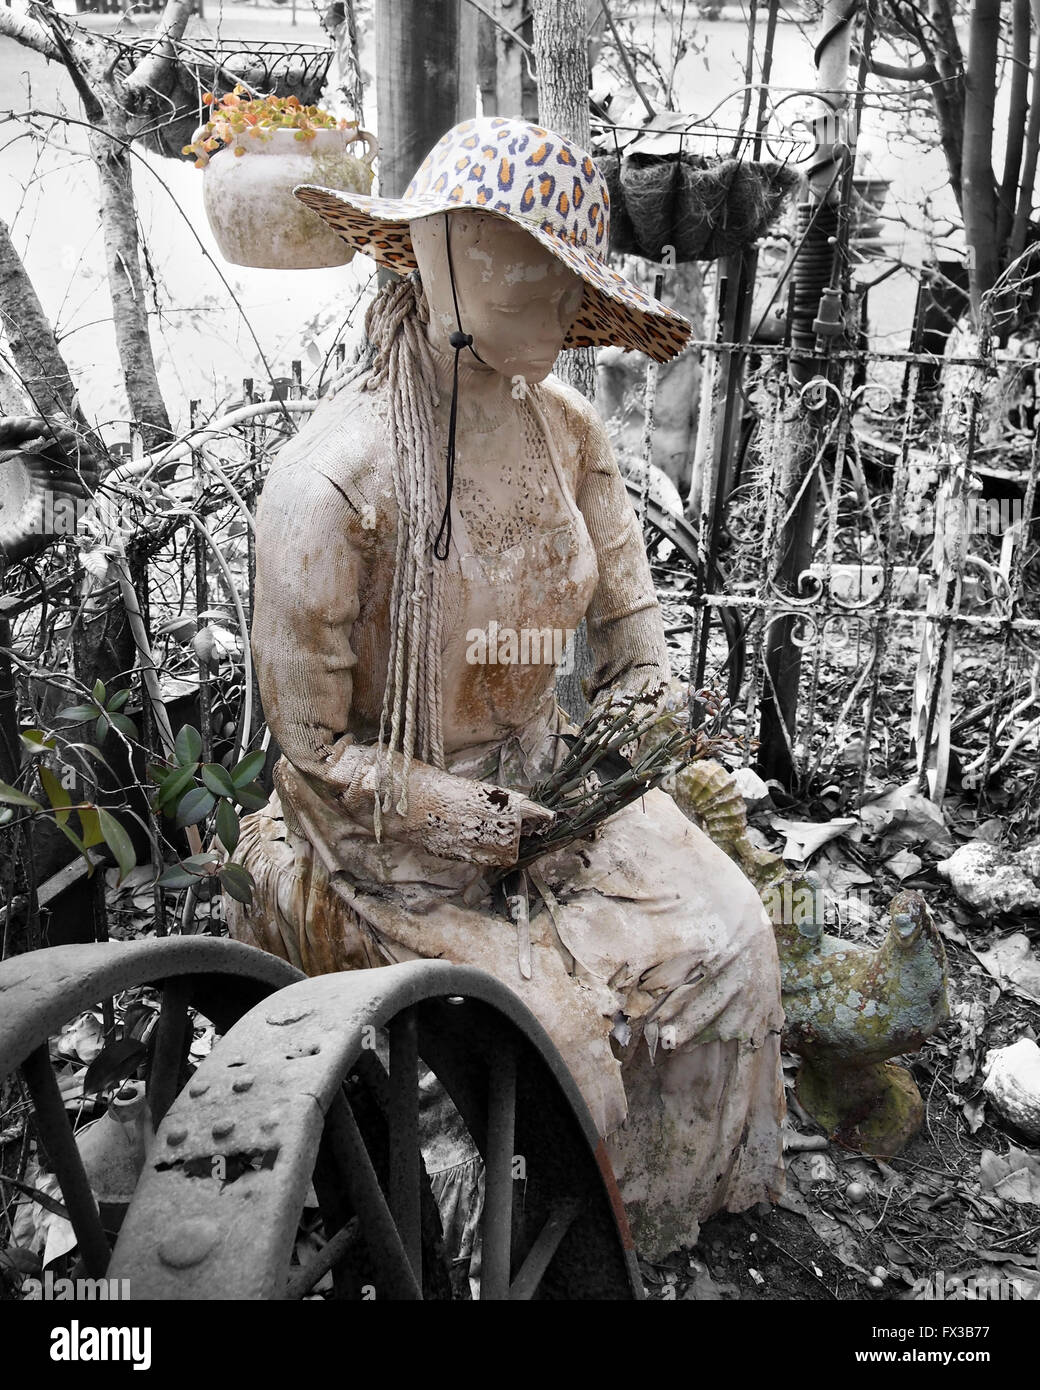 An old crumbling but beautiful statue of a woman with flowers and a cheetah print brimmed hat in a weedy garden, partially desat Stock Photo